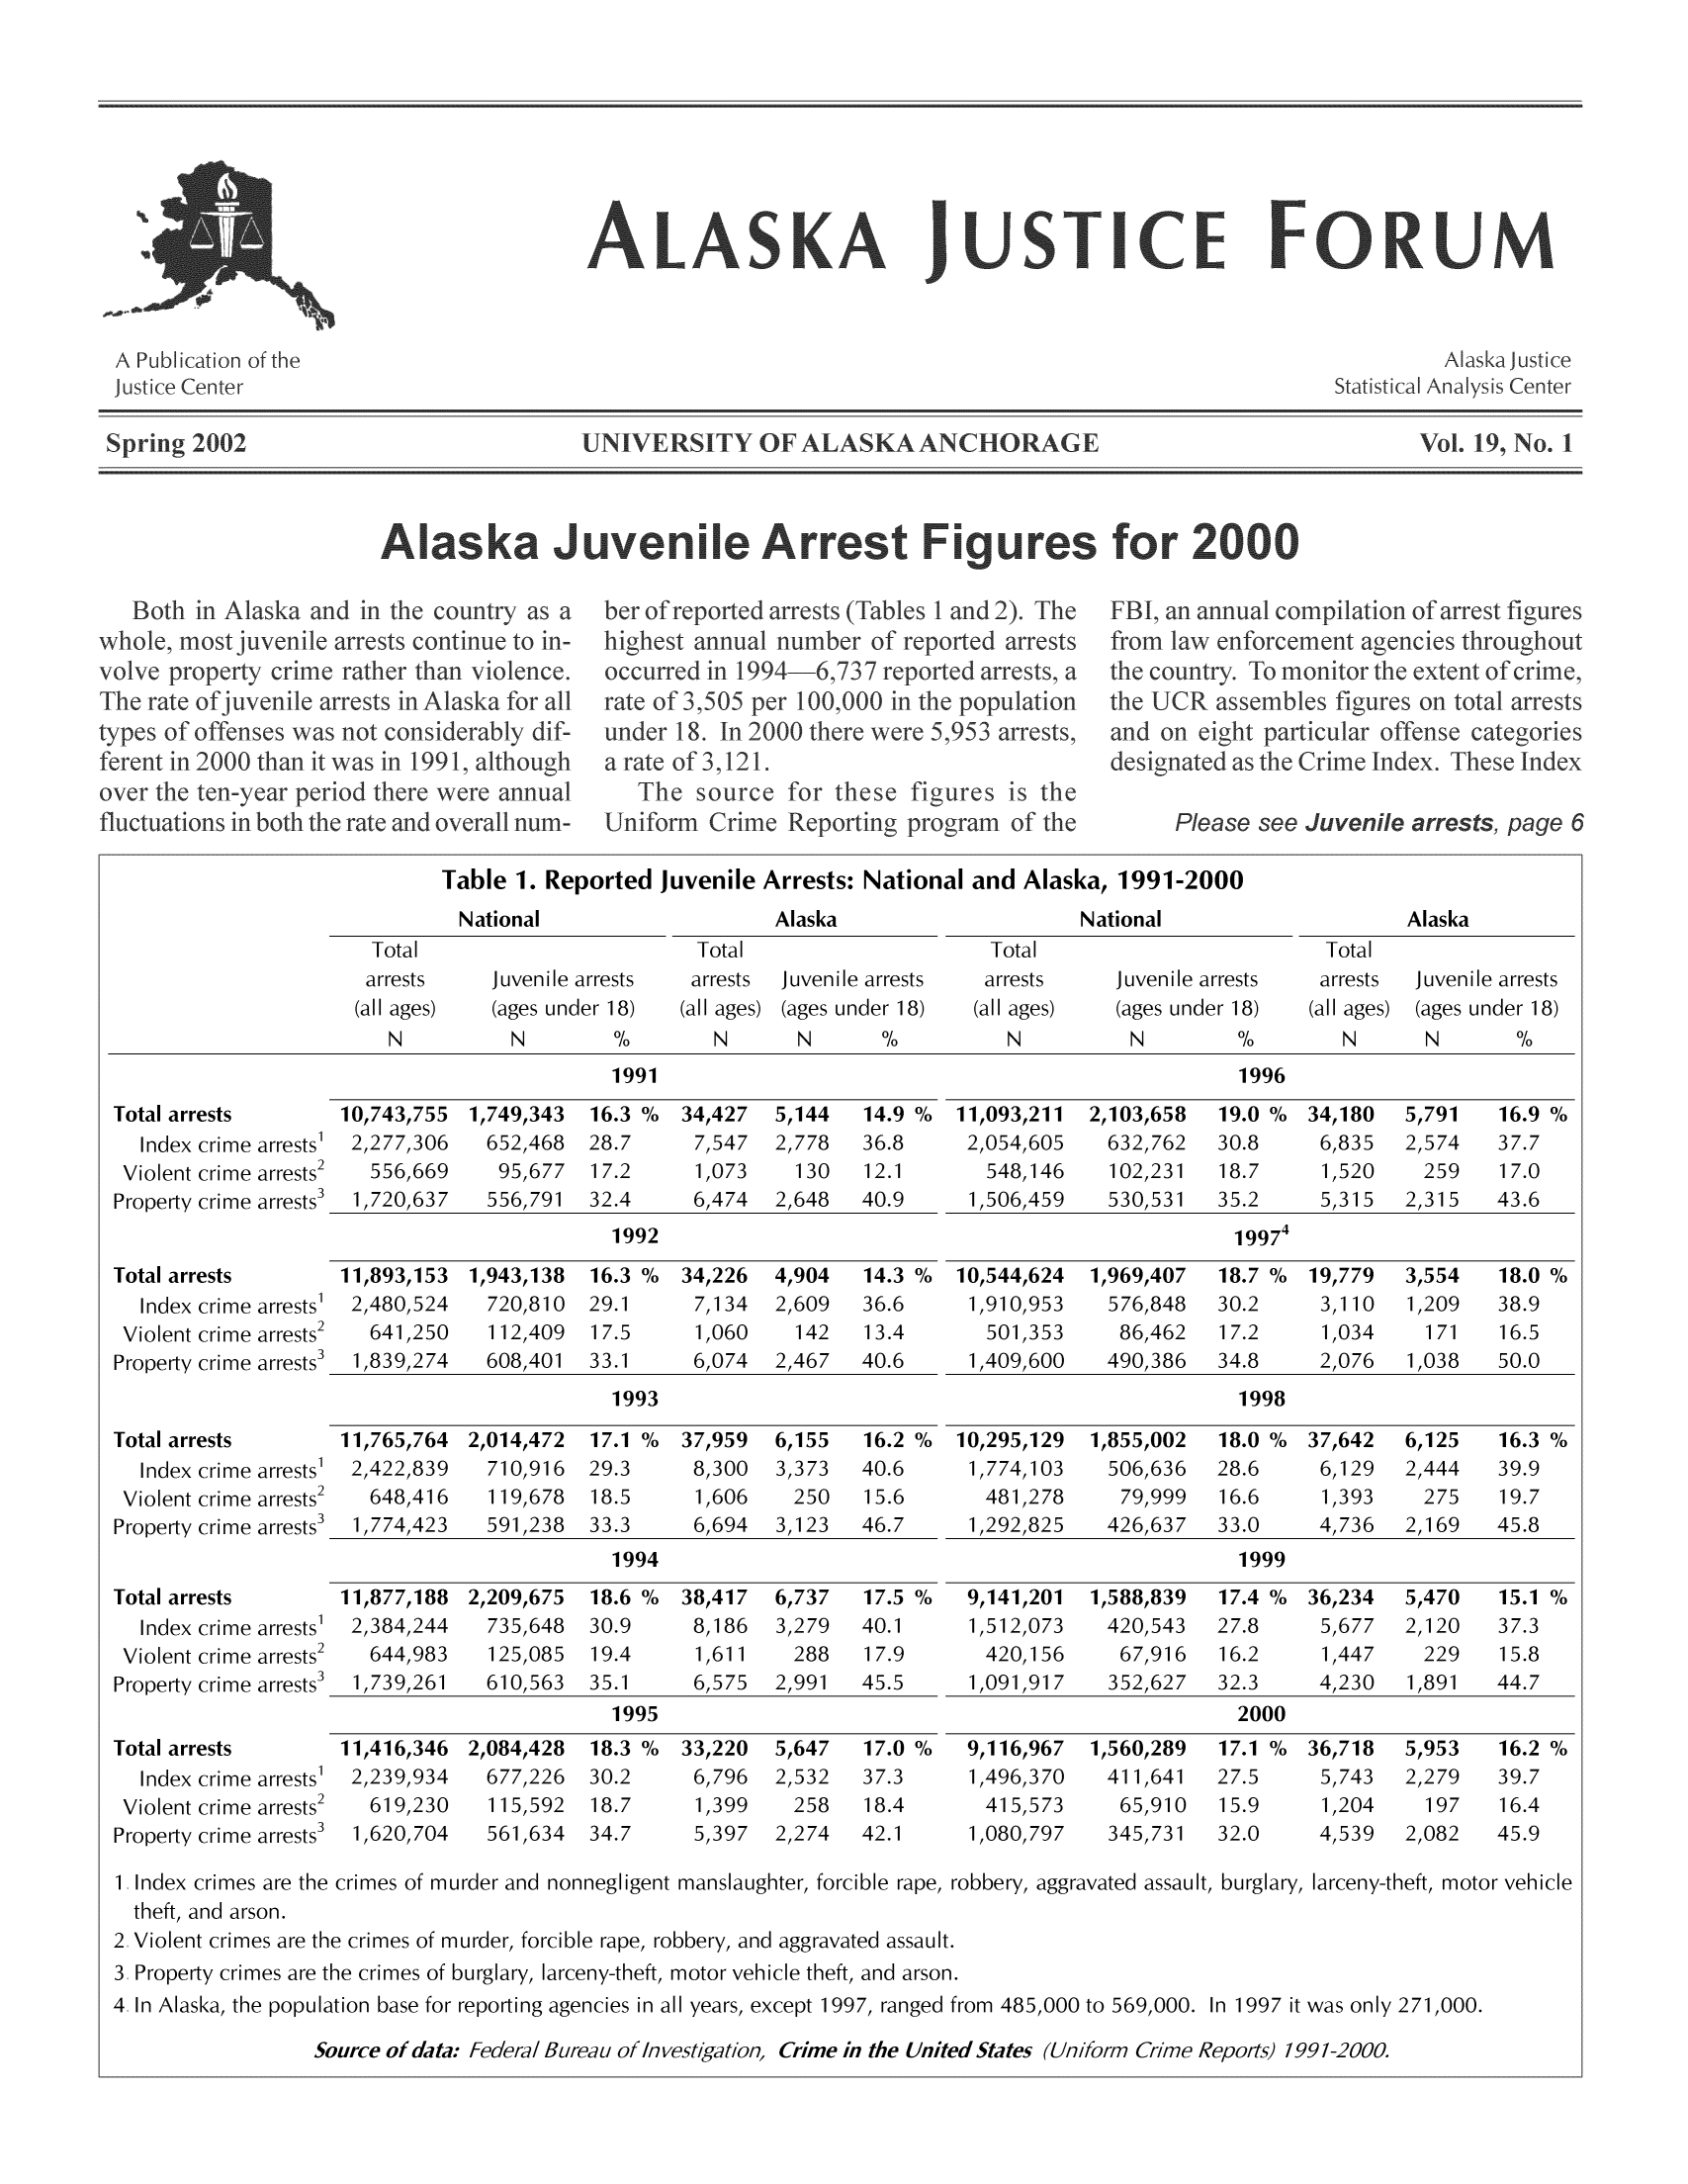 handle is hein.journals/aljufor19 and id is 1 raw text is: Table 1. Reported Juvenile Arrests: National and Alaska, 1991-2000Juvenile arrests(ages under 18)N         %1991AlaskaTotalarrests   Juvenile arrests(all ages) (ages under 18)NationalTotalarrests(all ages)AlaskaTotalJuvenile arrests       arrests    Juvenile arrests(ages under 18)       (all ages)  (ages under 18)N      N      %         N          N       %        N      N1996Total arrests       10,743,755  1,749,343  16.3 %Index crime arrests1  2,277,306  652,468  28.7Violent crime arrests2  556,669  95,677  17.2Property crime arrests3  1,720,637  556,791  32.41992Total arrests       11,893,153 1,943,138  16.3 %Index crime arrests1  2,480,524  720,810  29.1Violent crime arrests2  641,250  112,409  17.5Property crime arrests3  1,839,274  608,401  33.11993Total arrests       11,765,764 2,014,472  17.1 %Index crime arrests'  2,422,839  710,916  29.3Violent crime arrests2  648,416  119,678  18.5Property crime arrests3  1,774,423  591,238  33.31994Total arrests       11,877,188 2,209,675  18.6 %Index crime arrests'  2,384,244  735,648  30.9Violent crime arrests2  644,983  125,085  19.4Property crime arrests3  1,739,261  610,563  35.11995Total arrests       11,416,346 2,084,428  18.3 %Index crime arrests1  2,239,934  677,226  30.2Violent crime arrests2  619,230  115,592  18.7Property crime arrests3  1,620,704  561,634  34.734,4277,5471,0736,47434,2267,1341,0606,07437,9598,3001,6066,69438,4178,1861,6116,57533,2206,7961,3995,3975,1442,7781302,6484,9042,6091422,4676,1553,3732503,1236,7373,2792882,9915,6472,5322582,27414.9 %36.812.140.914.3 %36.613.440.616.2 %40.615.646.717.5 %40.117.945.517.0 %37.318.442.111,093,211 2,103,6582,054,605  632,762548,146   102,2311,506,459  530,53110,544,624  1,969,4071,910,953  576,848501,353    86,4621,409,600  490,38610,295,129  1,855,0021,774,103  506,636481,278    79,9991,292,825  426,6379,141,201  1,588,8391,512,073  420,543420,156    67,9161,091,917  352,6279,116,967  1,560,2891,496,370  411,641415,573    65,9101,080,797  345,73119.0 % 34,18030.8     6,83518.7     1,52035.2     5,3151997418.7 % 19,77930.2     3,11017.2     1,03434.8    2,076199818.0 % 37,64228.6     6,12916.6     1,39333.0    4,736199917.4 % 36,23427.8     5,67716.2     1,44732.3    4,230200017.1 % 36,71827.5     5,74315.9     1,20432.0    4,5391 Index crimes are the crimes of murder and nonnegligent manslaughter, forcible rape, robbery, aggravated assault, burglary, larceny-theft, motor vehicletheft, and arson.2 Violent crimes are the crimes of murder, forcible rape, robbery, and aggravated assault.3 Property crimes are the crimes of burglary, larceny-theft, motor vehicle theft, and arson.4 In Alaska, the population base for reporting agencies in all years, except 1997, ranged from 485,000 to 569,000. In 1997 it was only 271,000.Source of data: Federal Bureau of Investigation, Crime in the United States (Uniform Crime Reports) 1991-2000.NationalTotalarrests(all ages)N5,7912,5742592,3153,5541,2091711,0386,1252,4442752,1695,4702,1202291,8915,9532,2791972,08216.9 %37.717.043.618.0 %38.916.550.016.3 %39.919.745.815.1 %37.315.844.716.2 %39.716.445.9